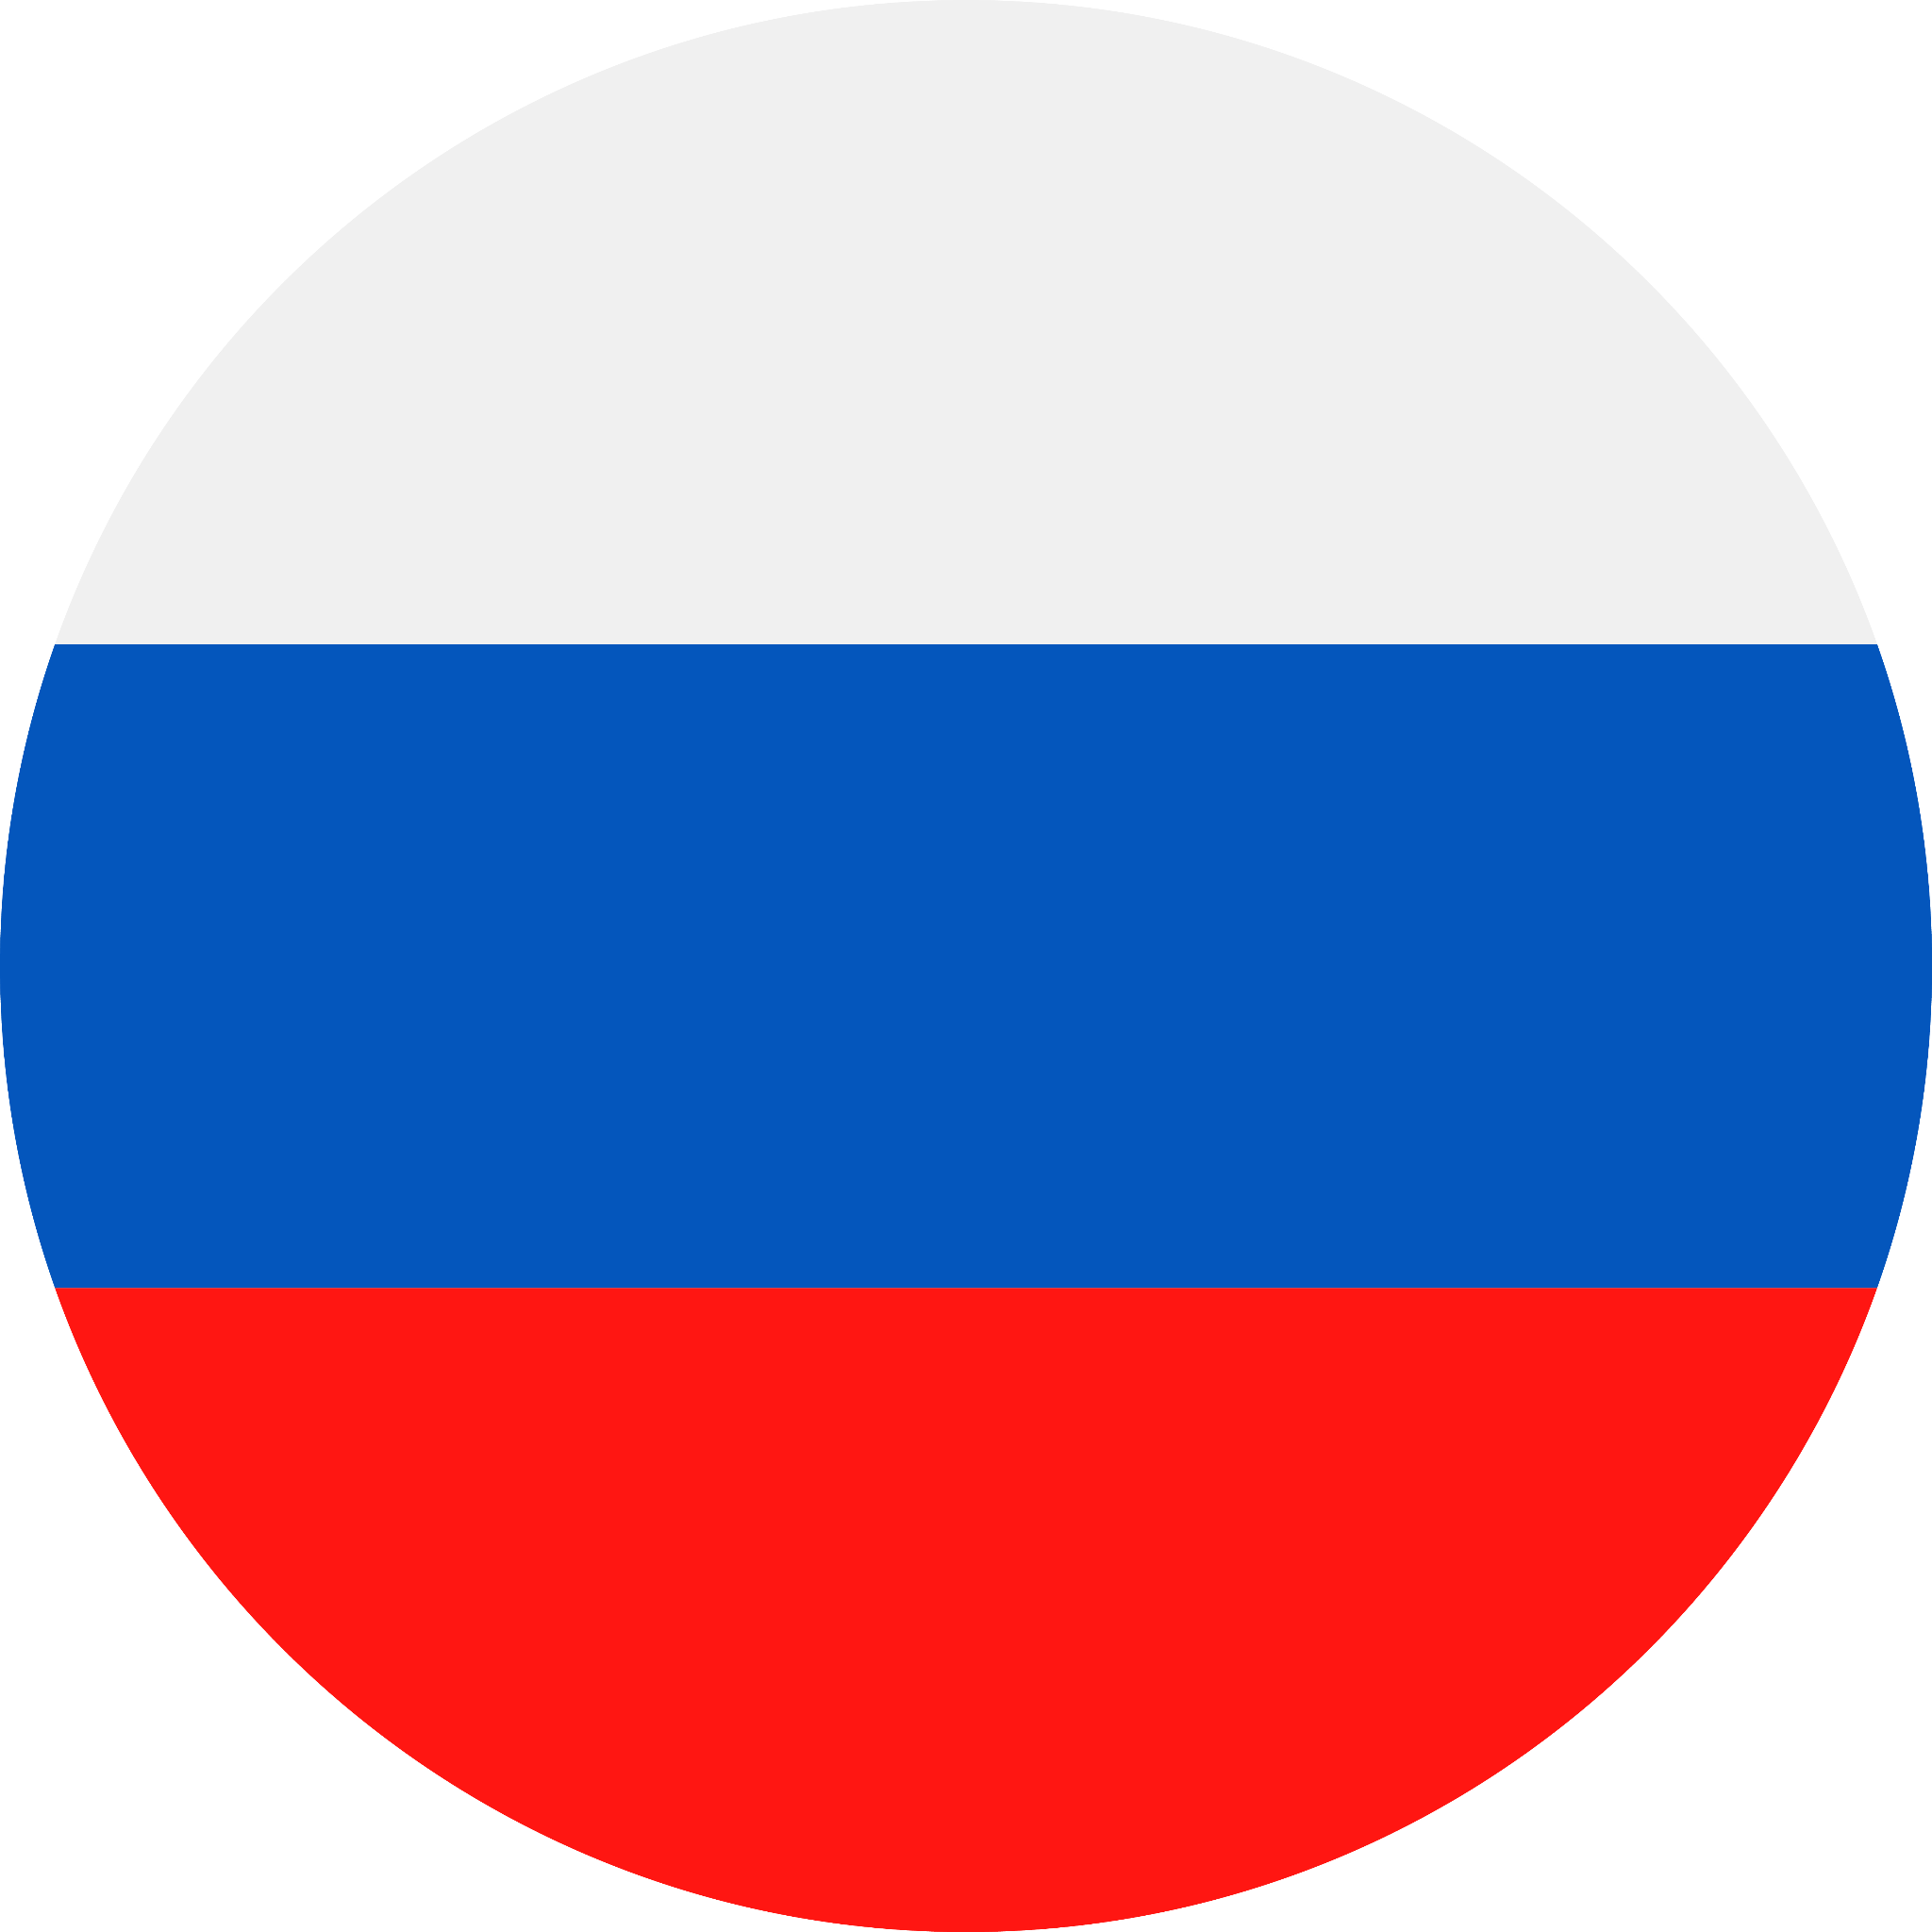 Image of the Russian flag, a tricolor representation in white, blue, and red, symbolizing the rich linguistic and cultural heritage of Russia.